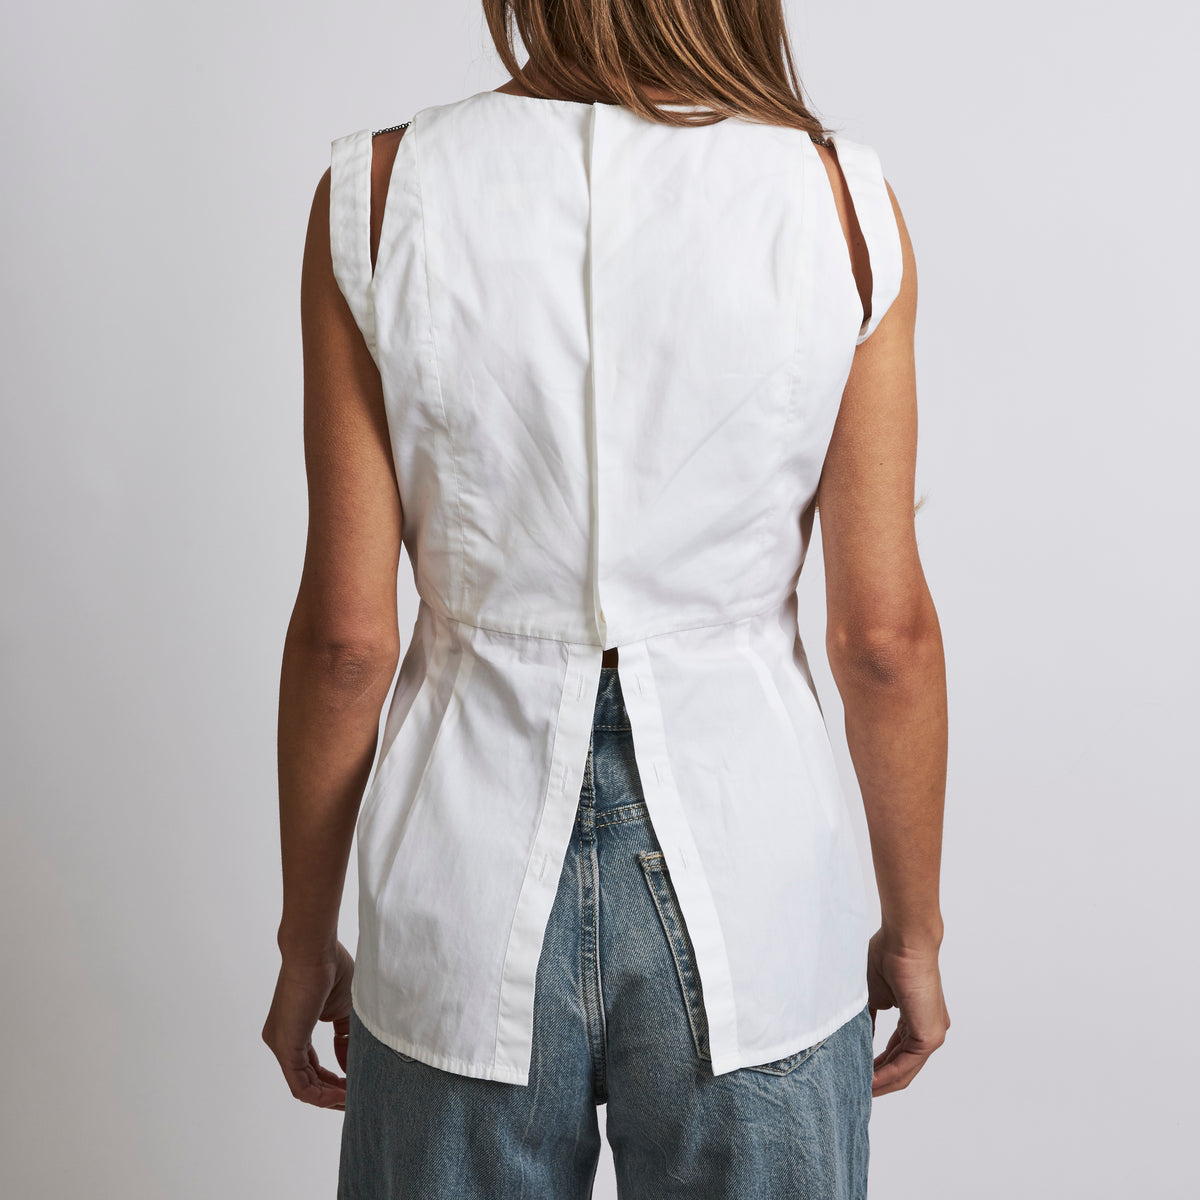 Excellent Pre-Loved White Cotton Sleeveless Peplum Top(back)